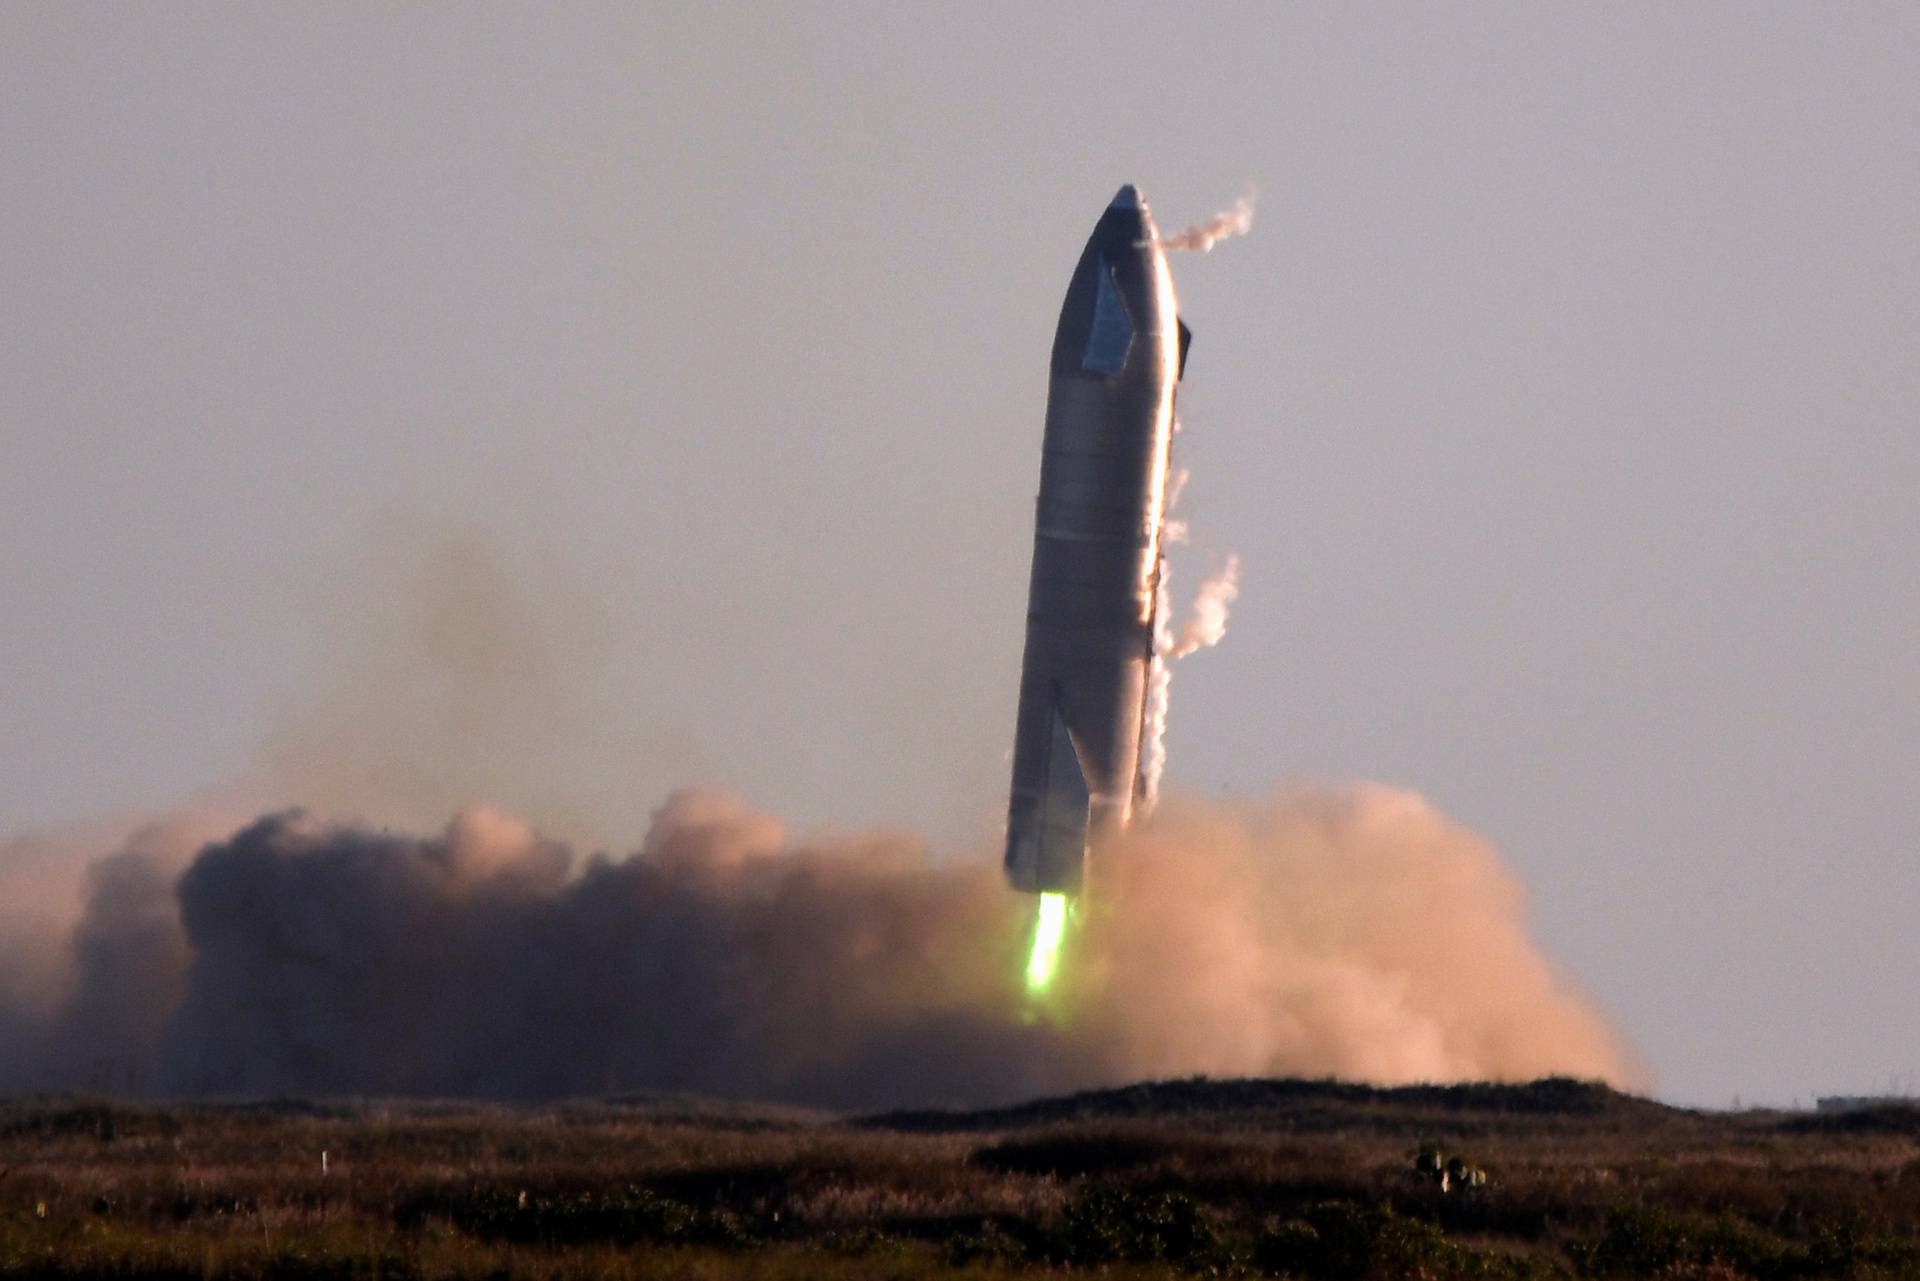 SpaceX's first super heavy-lift Starship SN8 rocket during a return-landing attempt after it launched from their facility on a test flight in Boca Chica, Texas